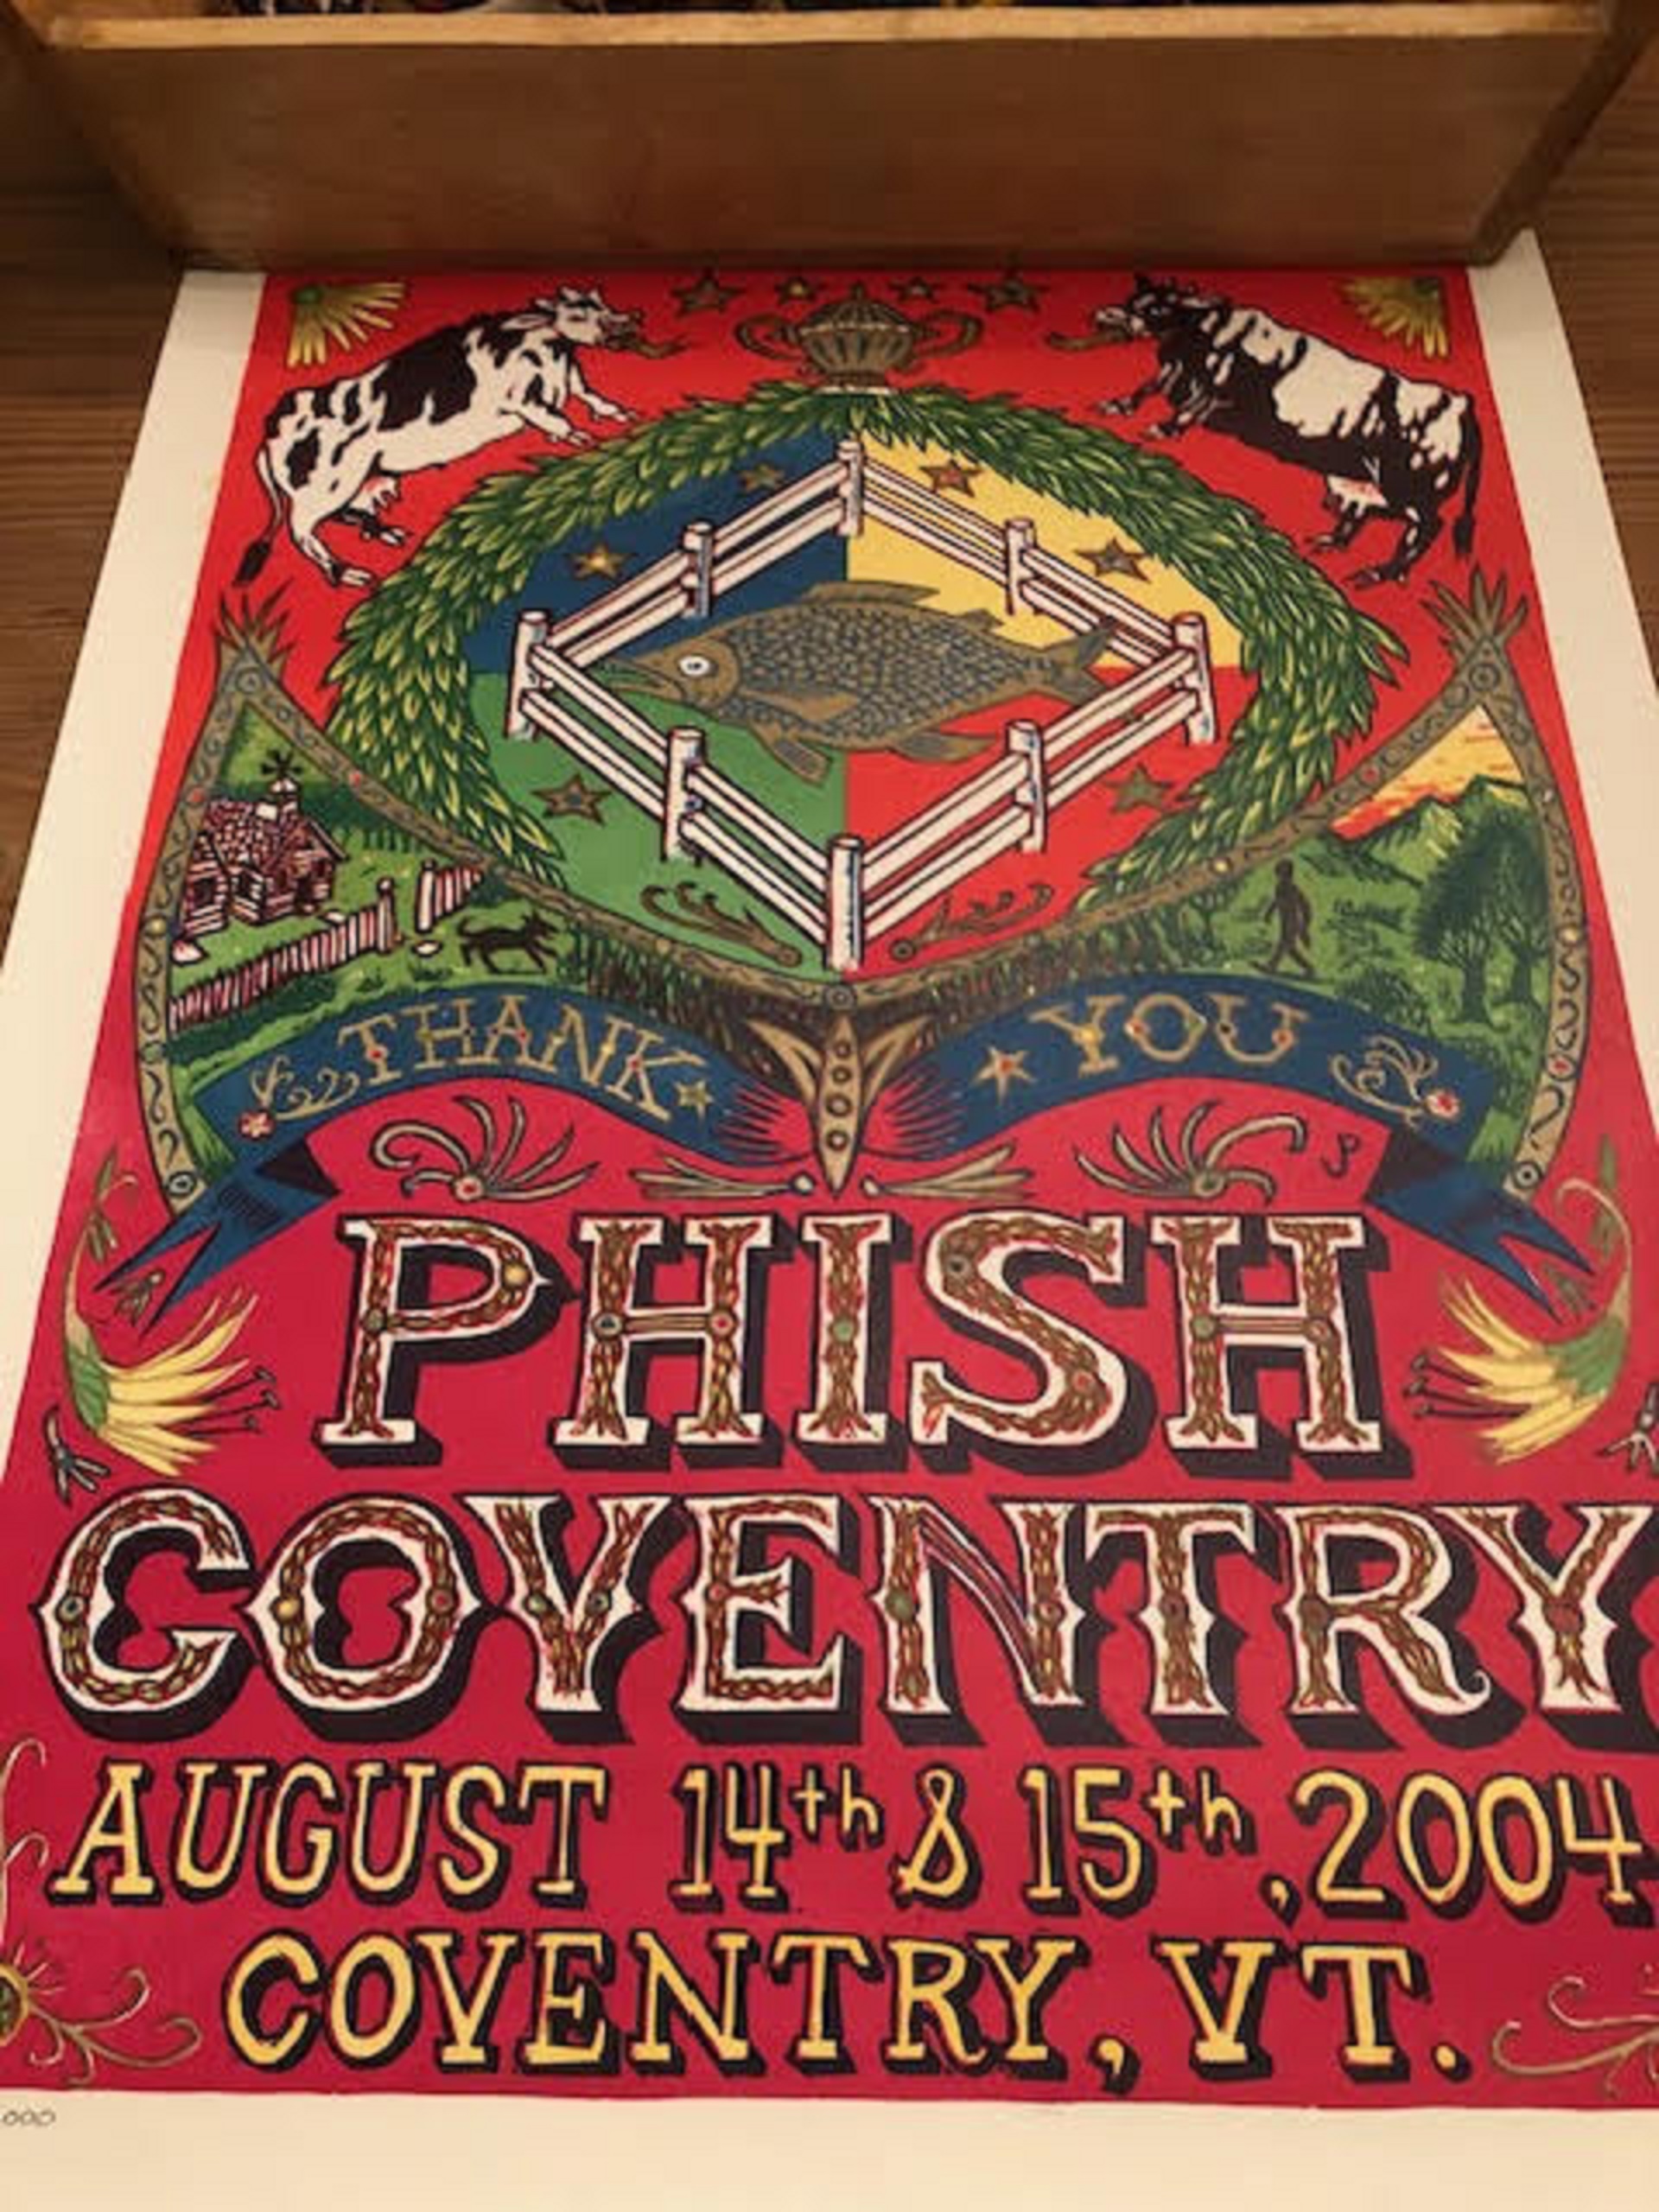 Coventry poster signed by all 4 members of Phish and the artist, Jim Pollock